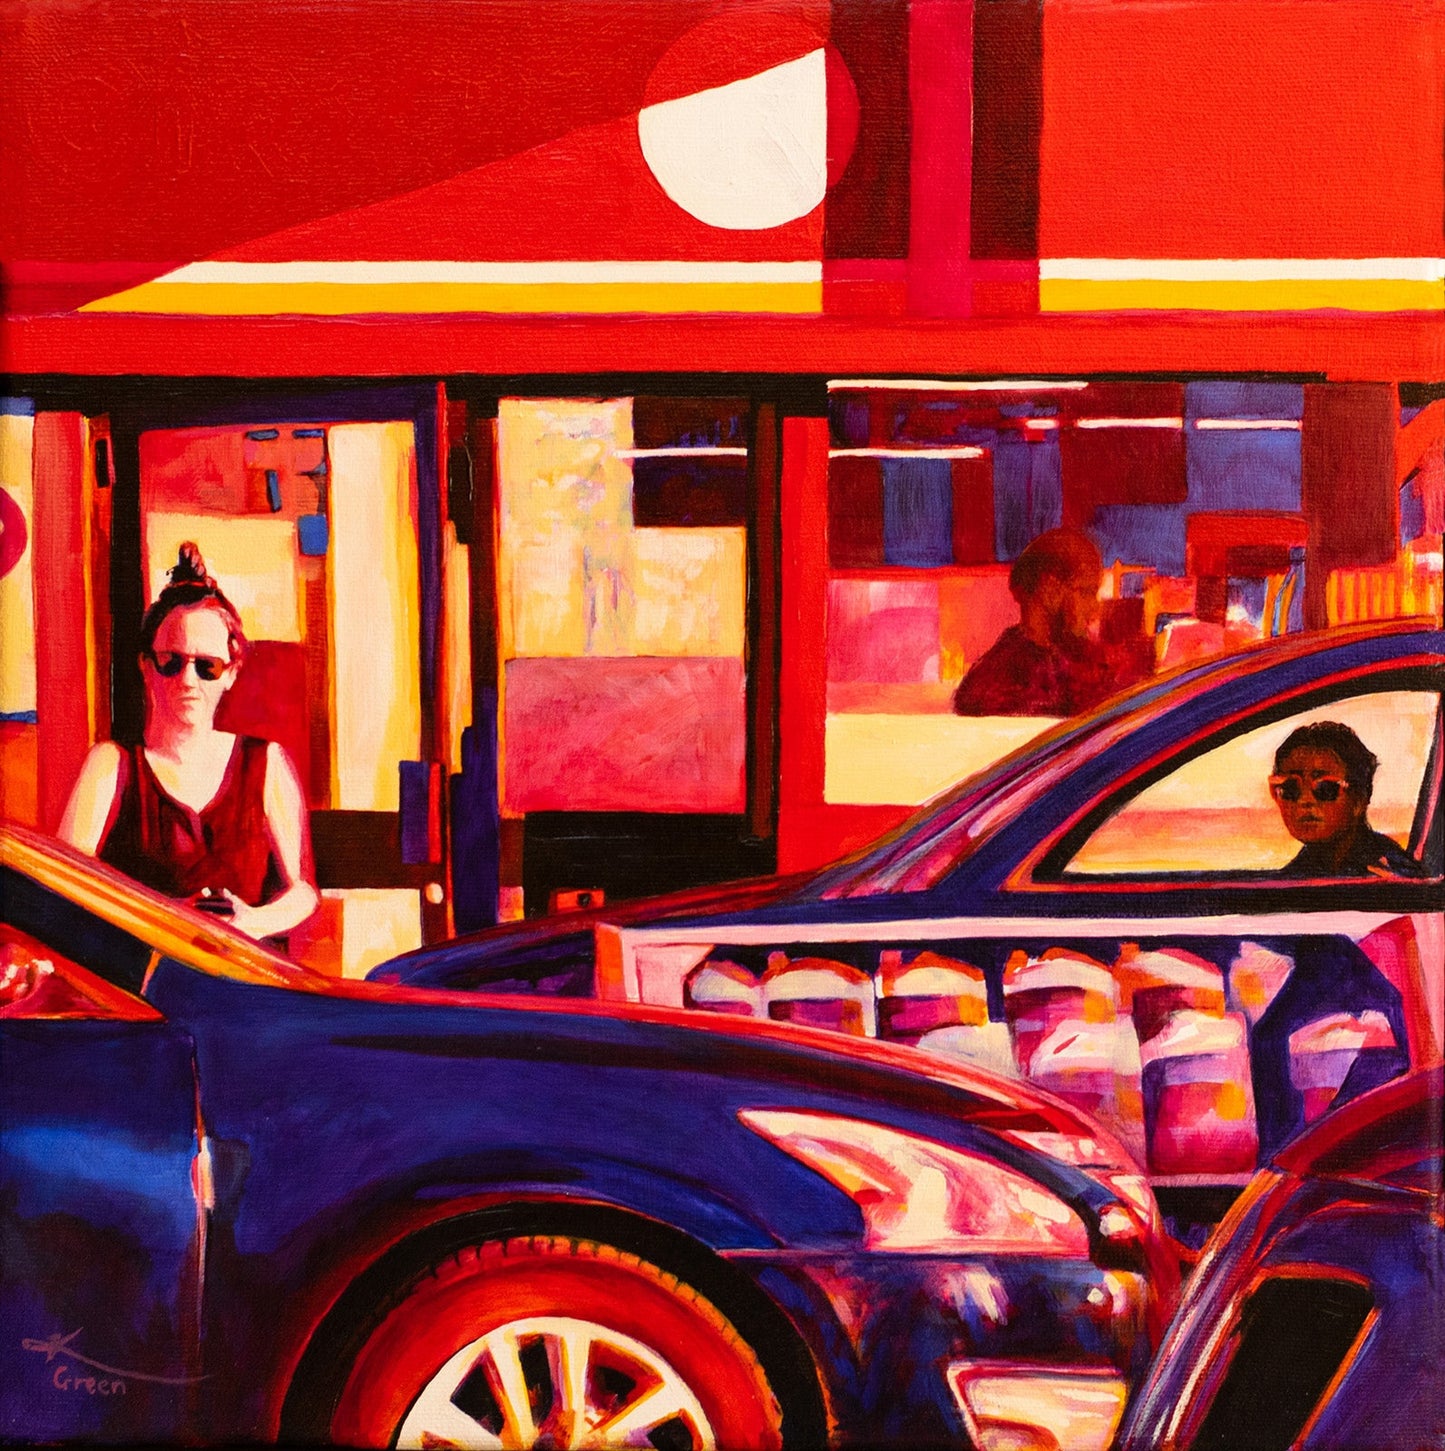 At The Pump - Composition in Red